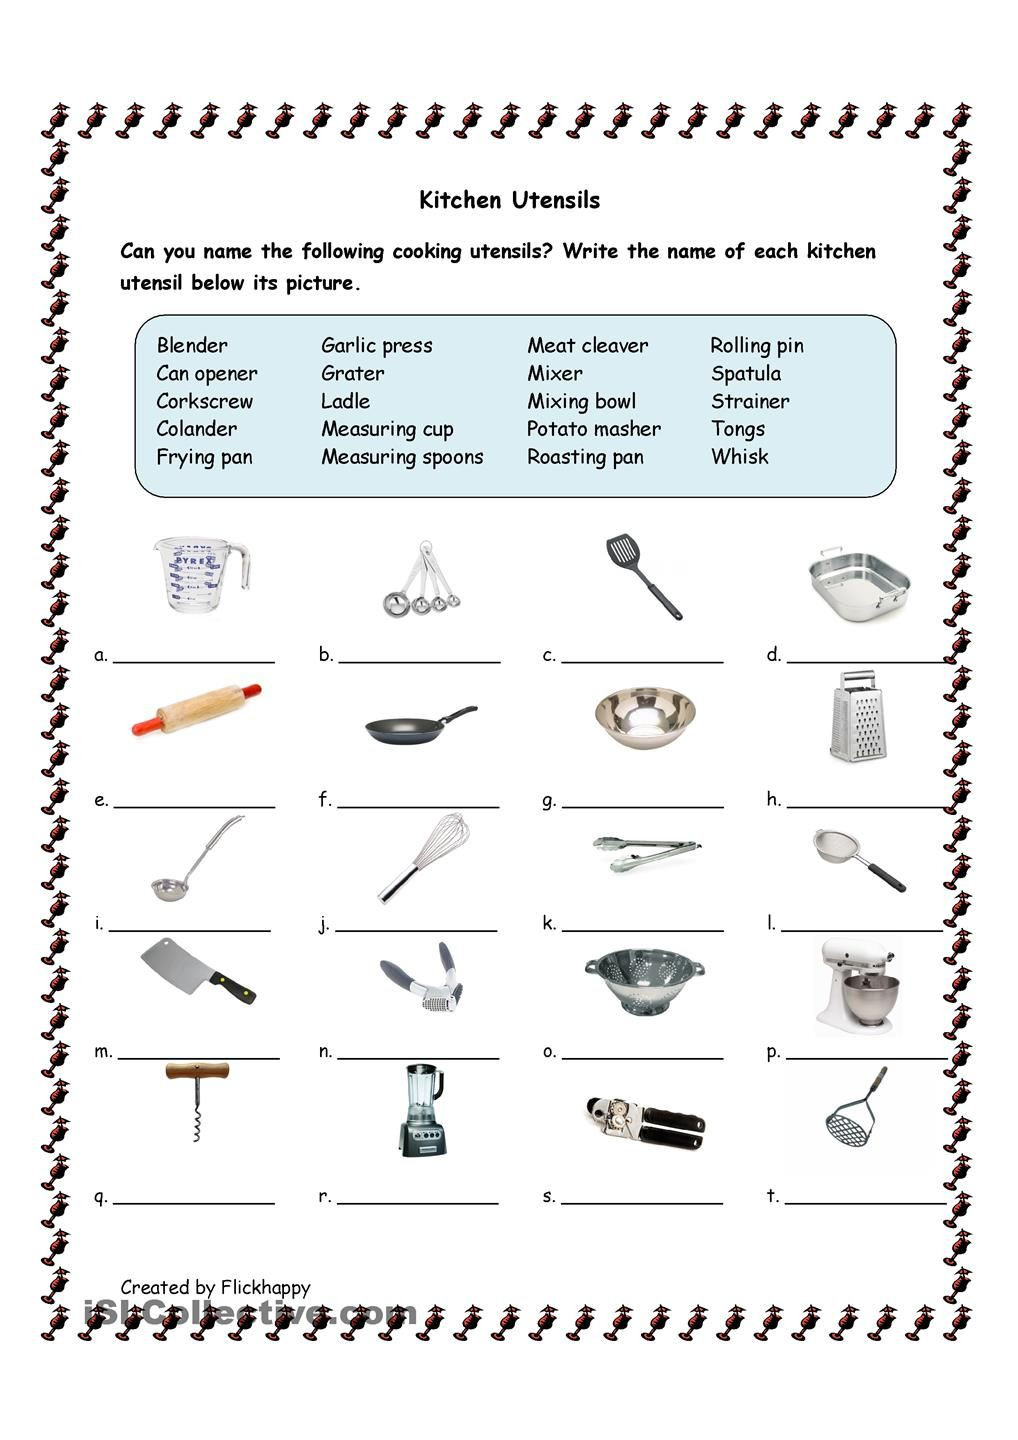 Basic Cooking Terms Worksheet Answers Twitter Pinterest This is A Great Resource for the